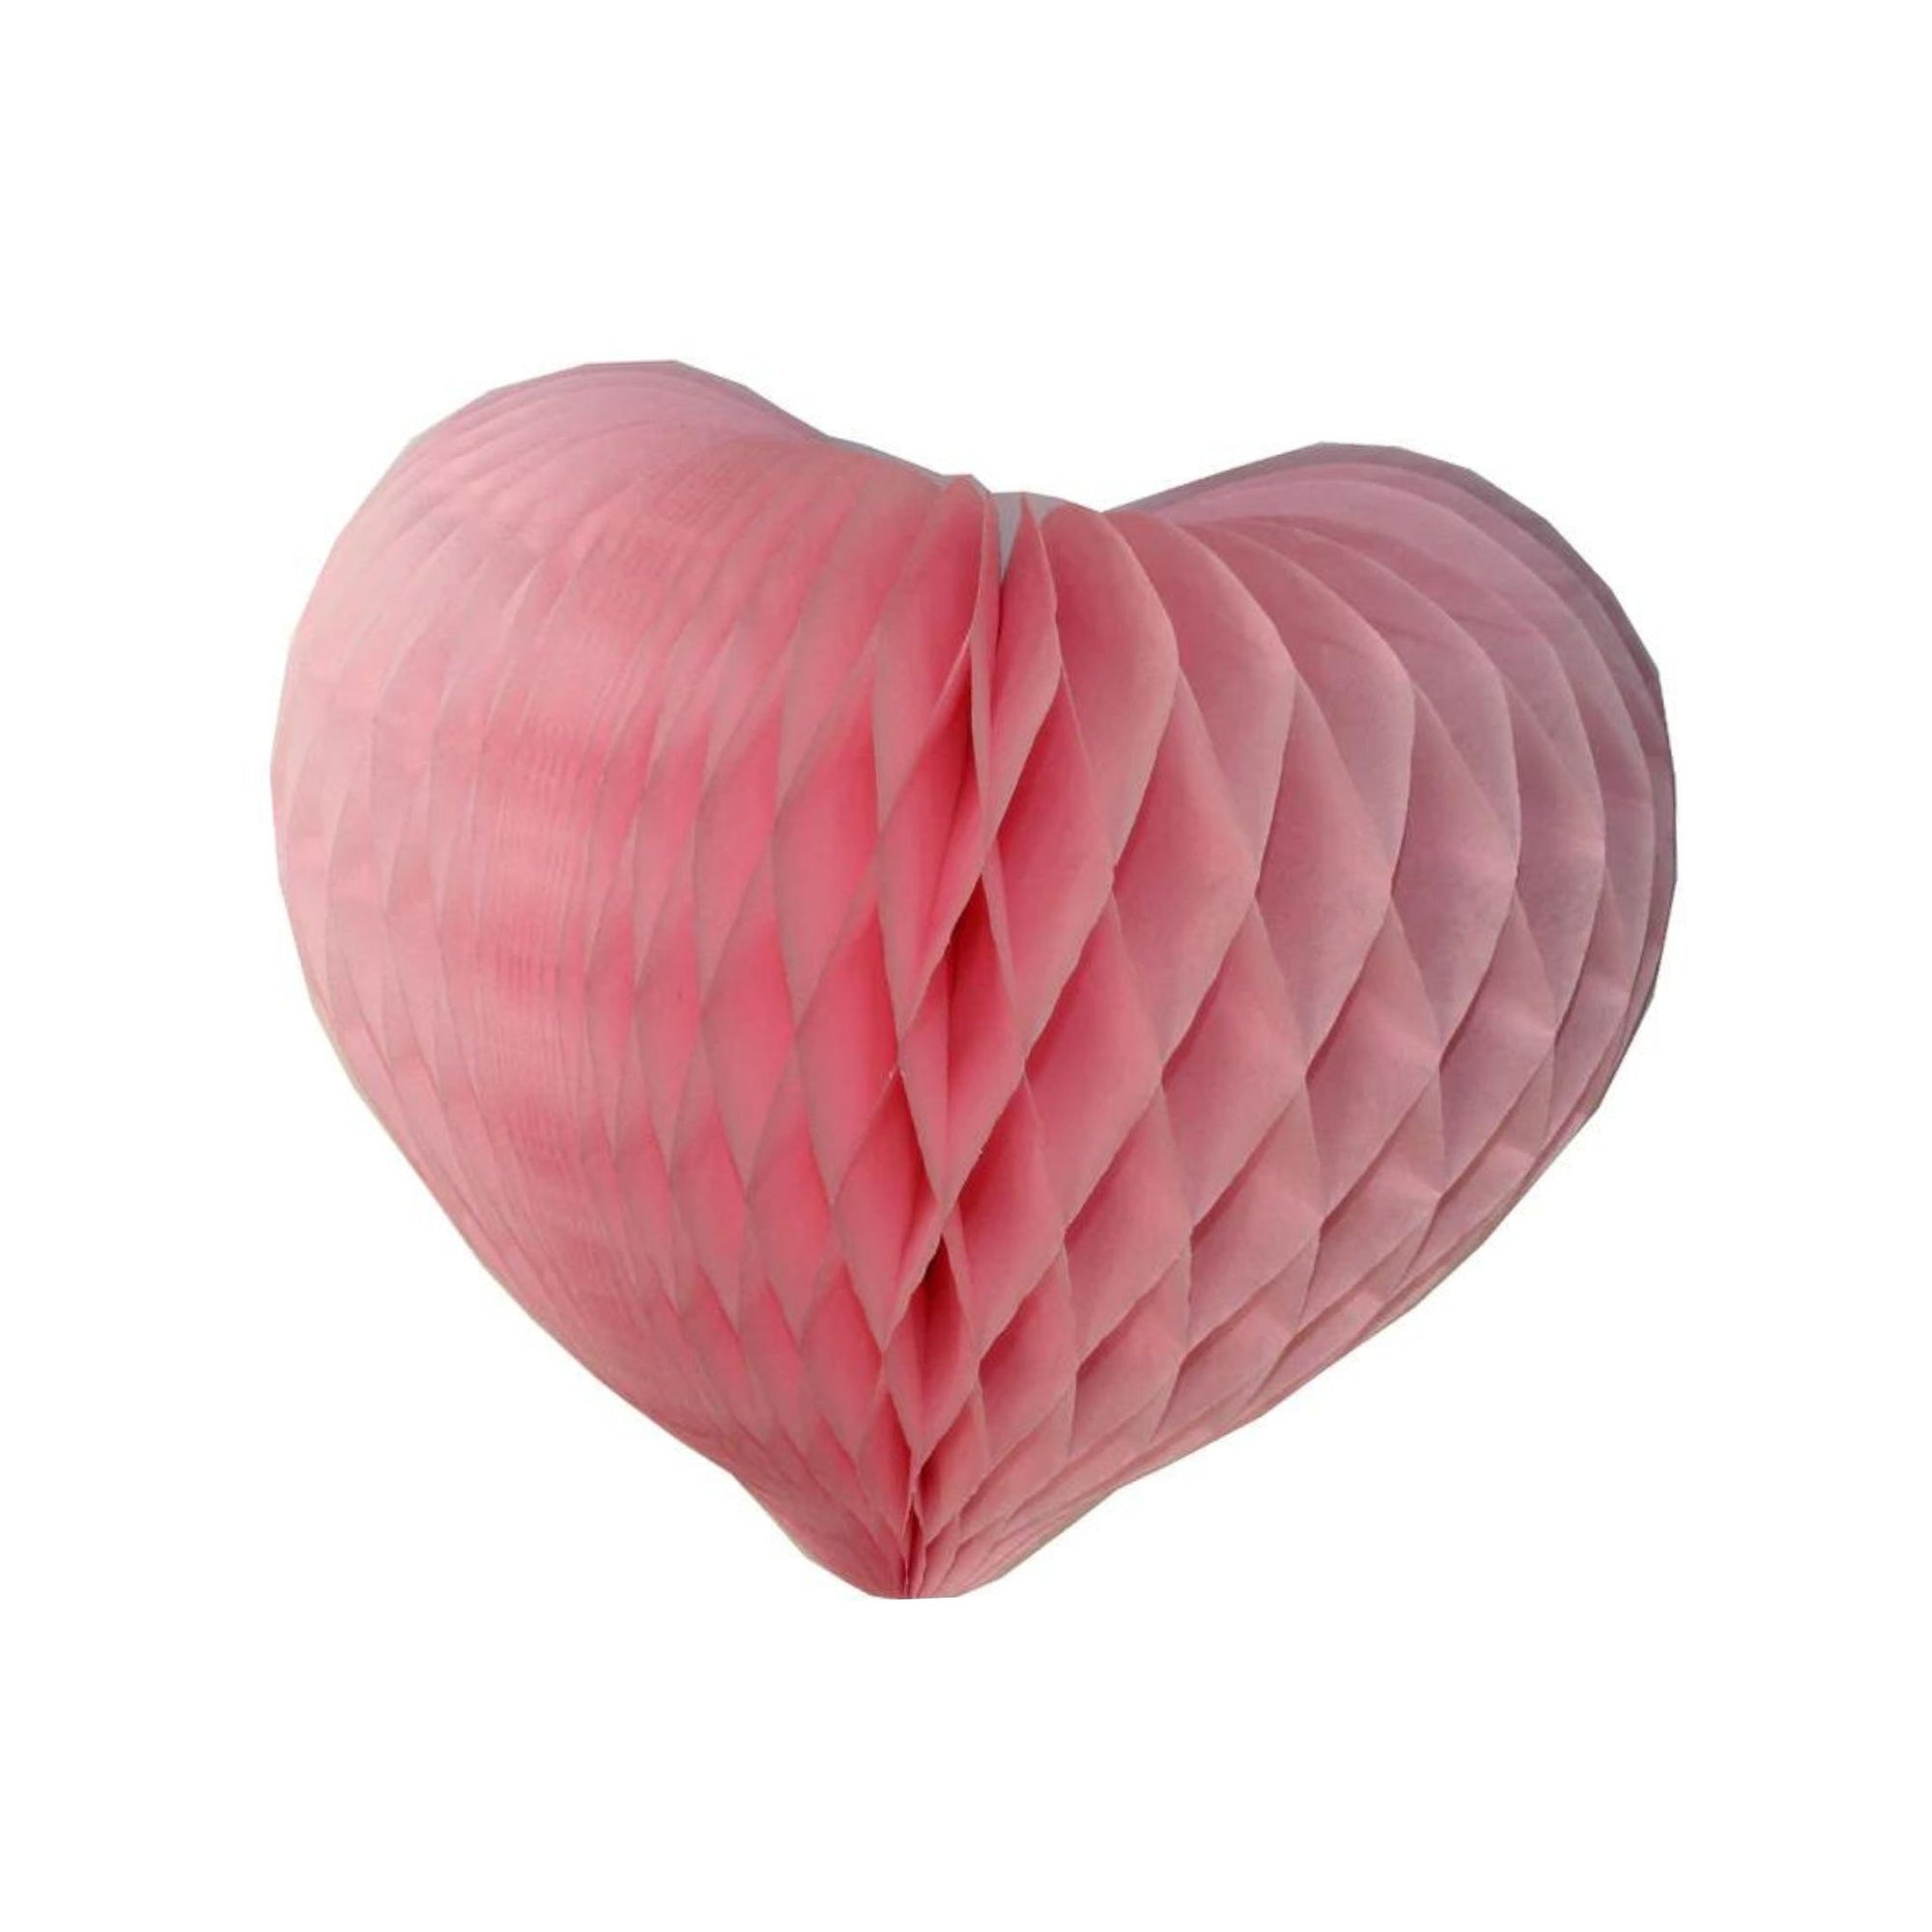 Large Honeycomb heart decoration 12 Inch - Light Pink-Fun-Little Fish Co.